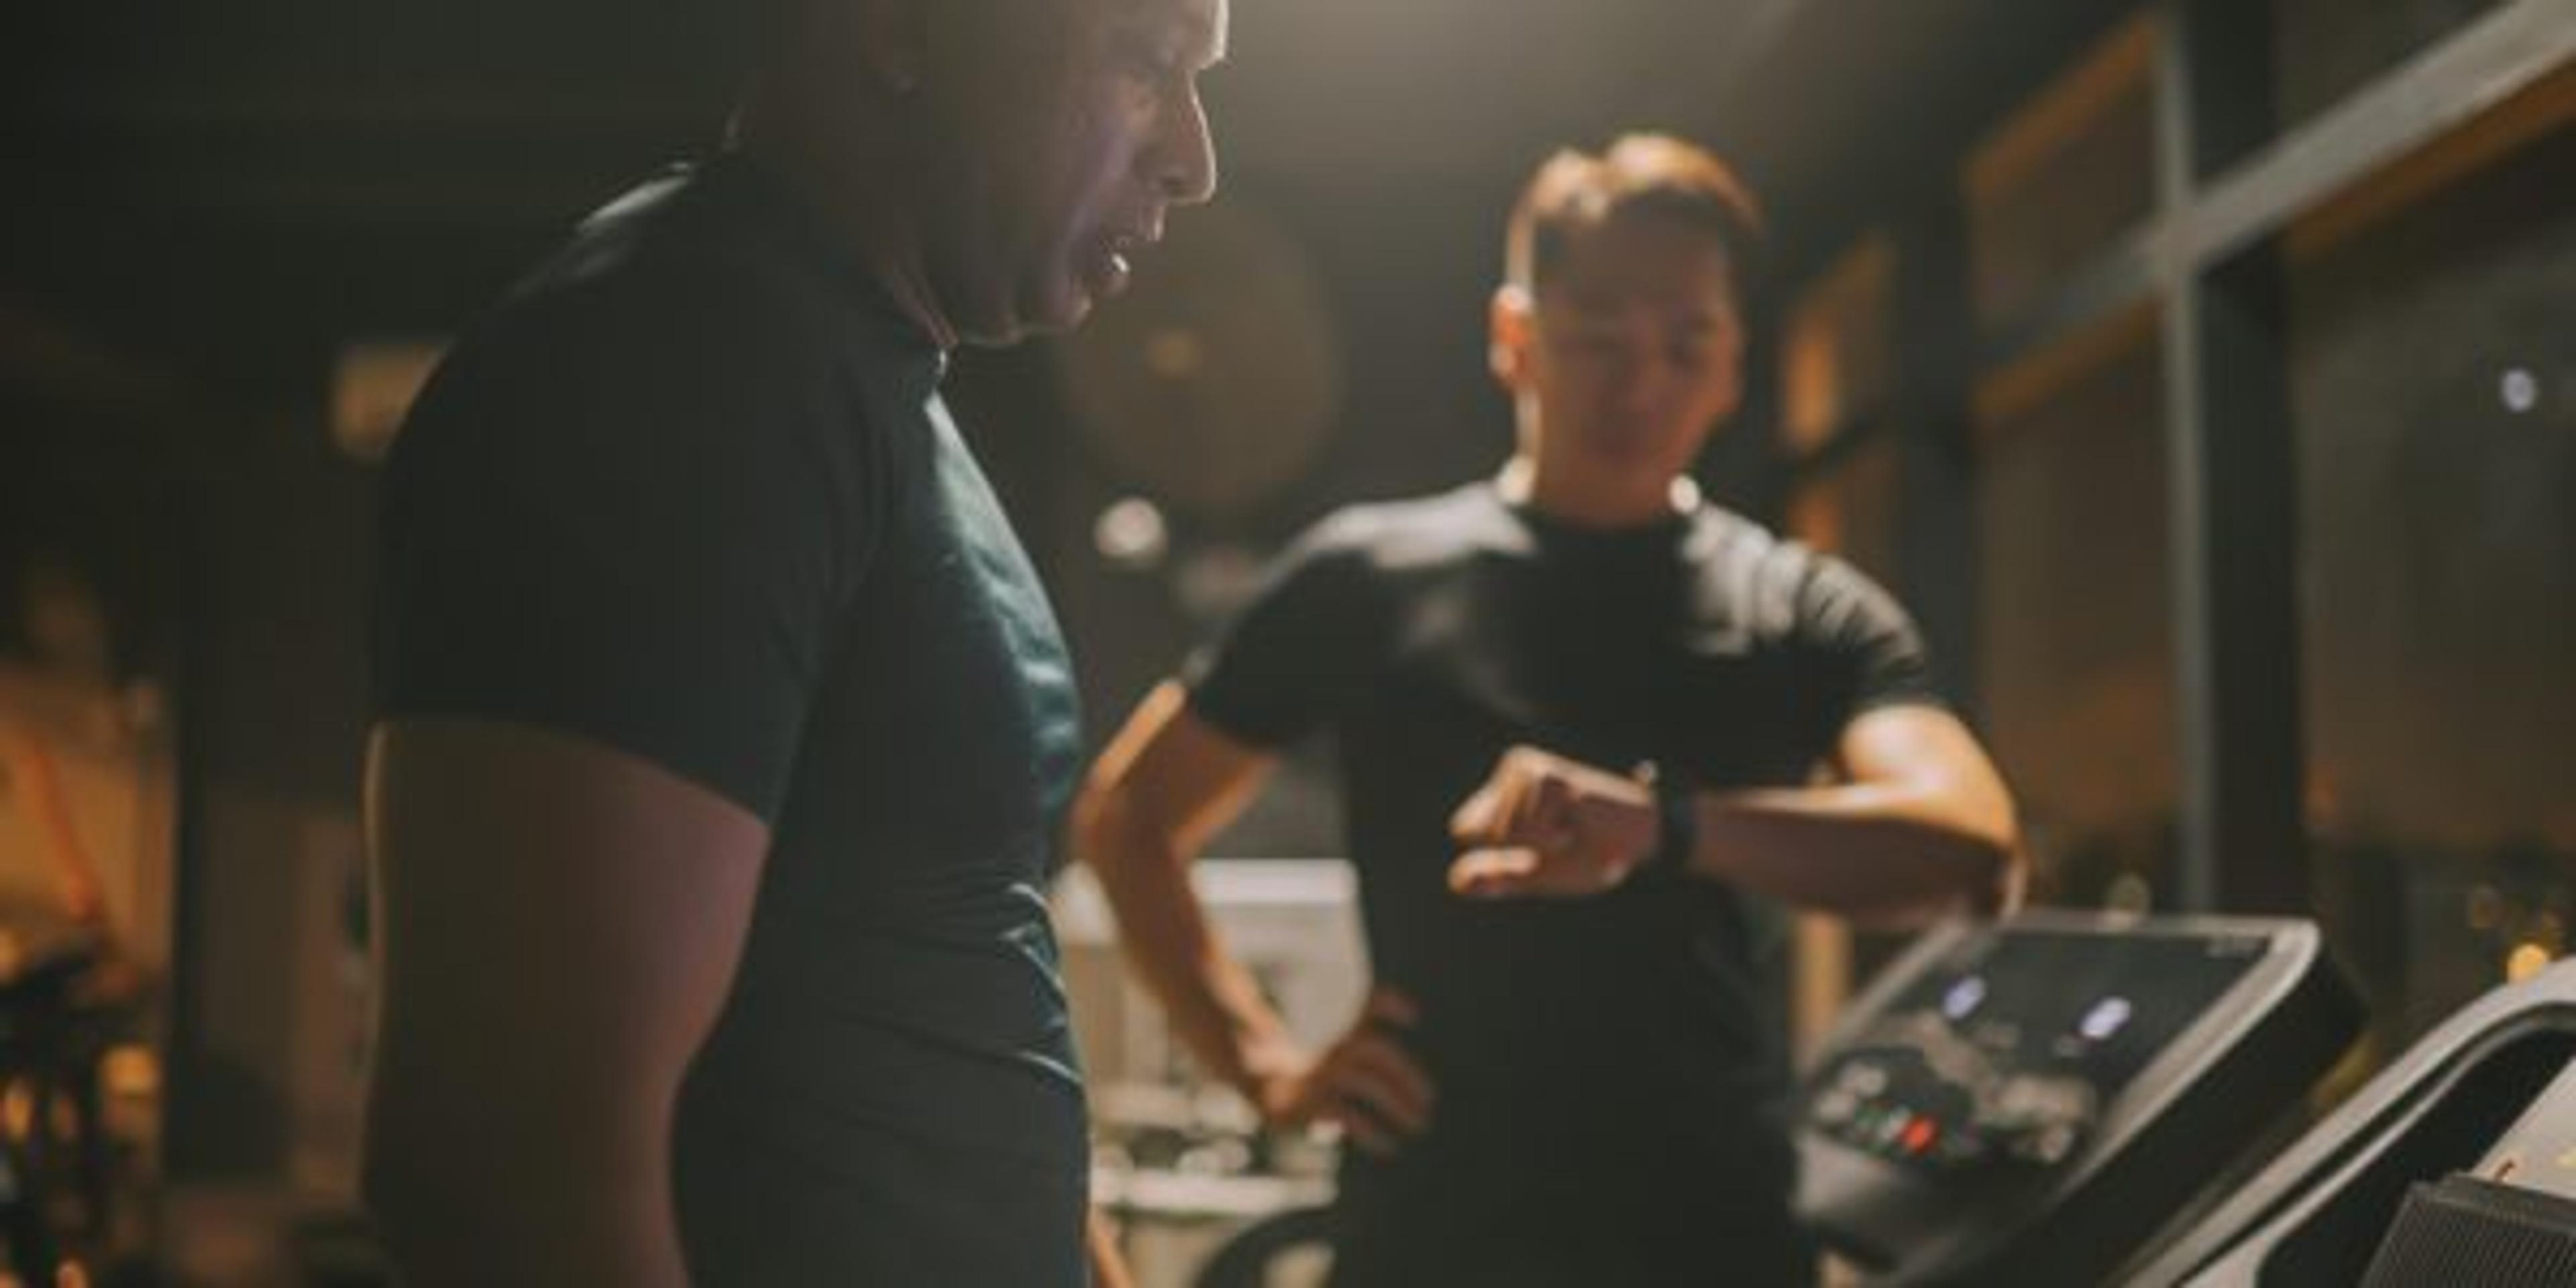 Body Positive Asian Indian man running on treadmill monitored by fitness instructor timing